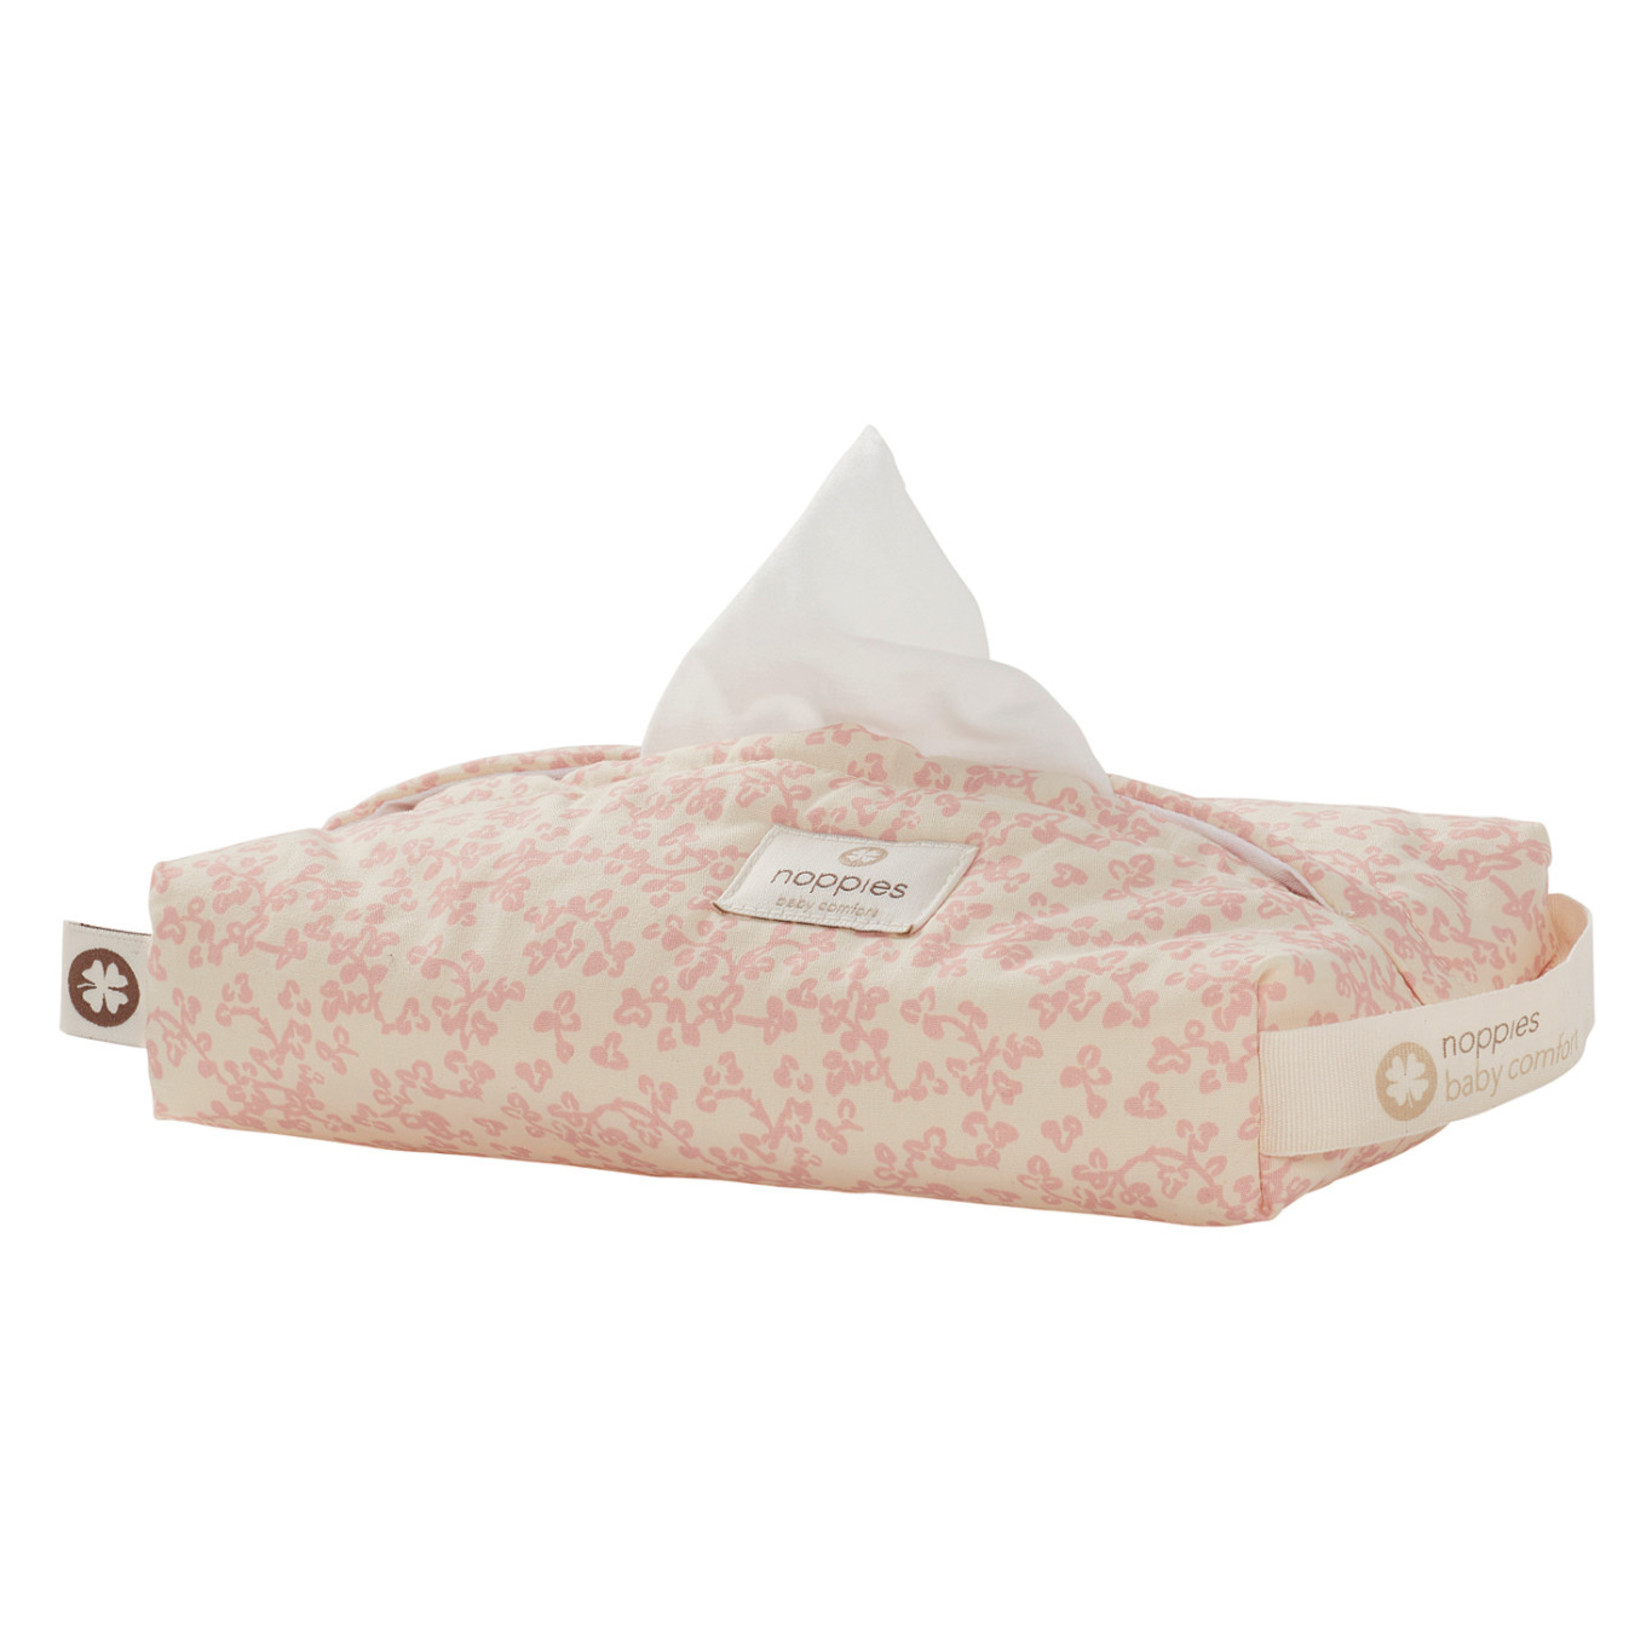 Noppies comfort Botanical wet wipes cover - coated